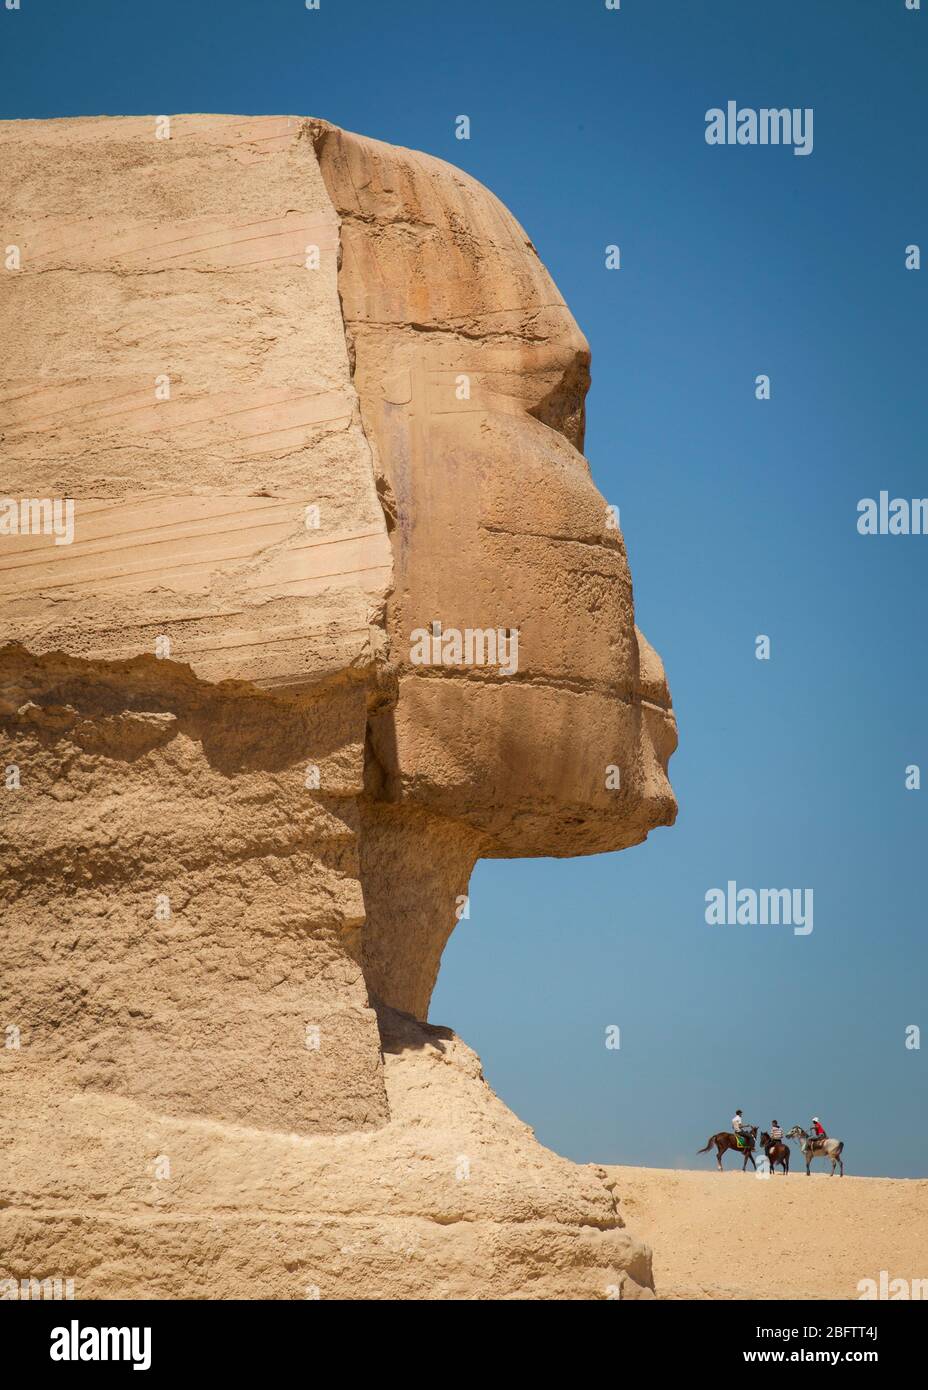 The Great Sphinx of Giza in Profile View Stock Photo